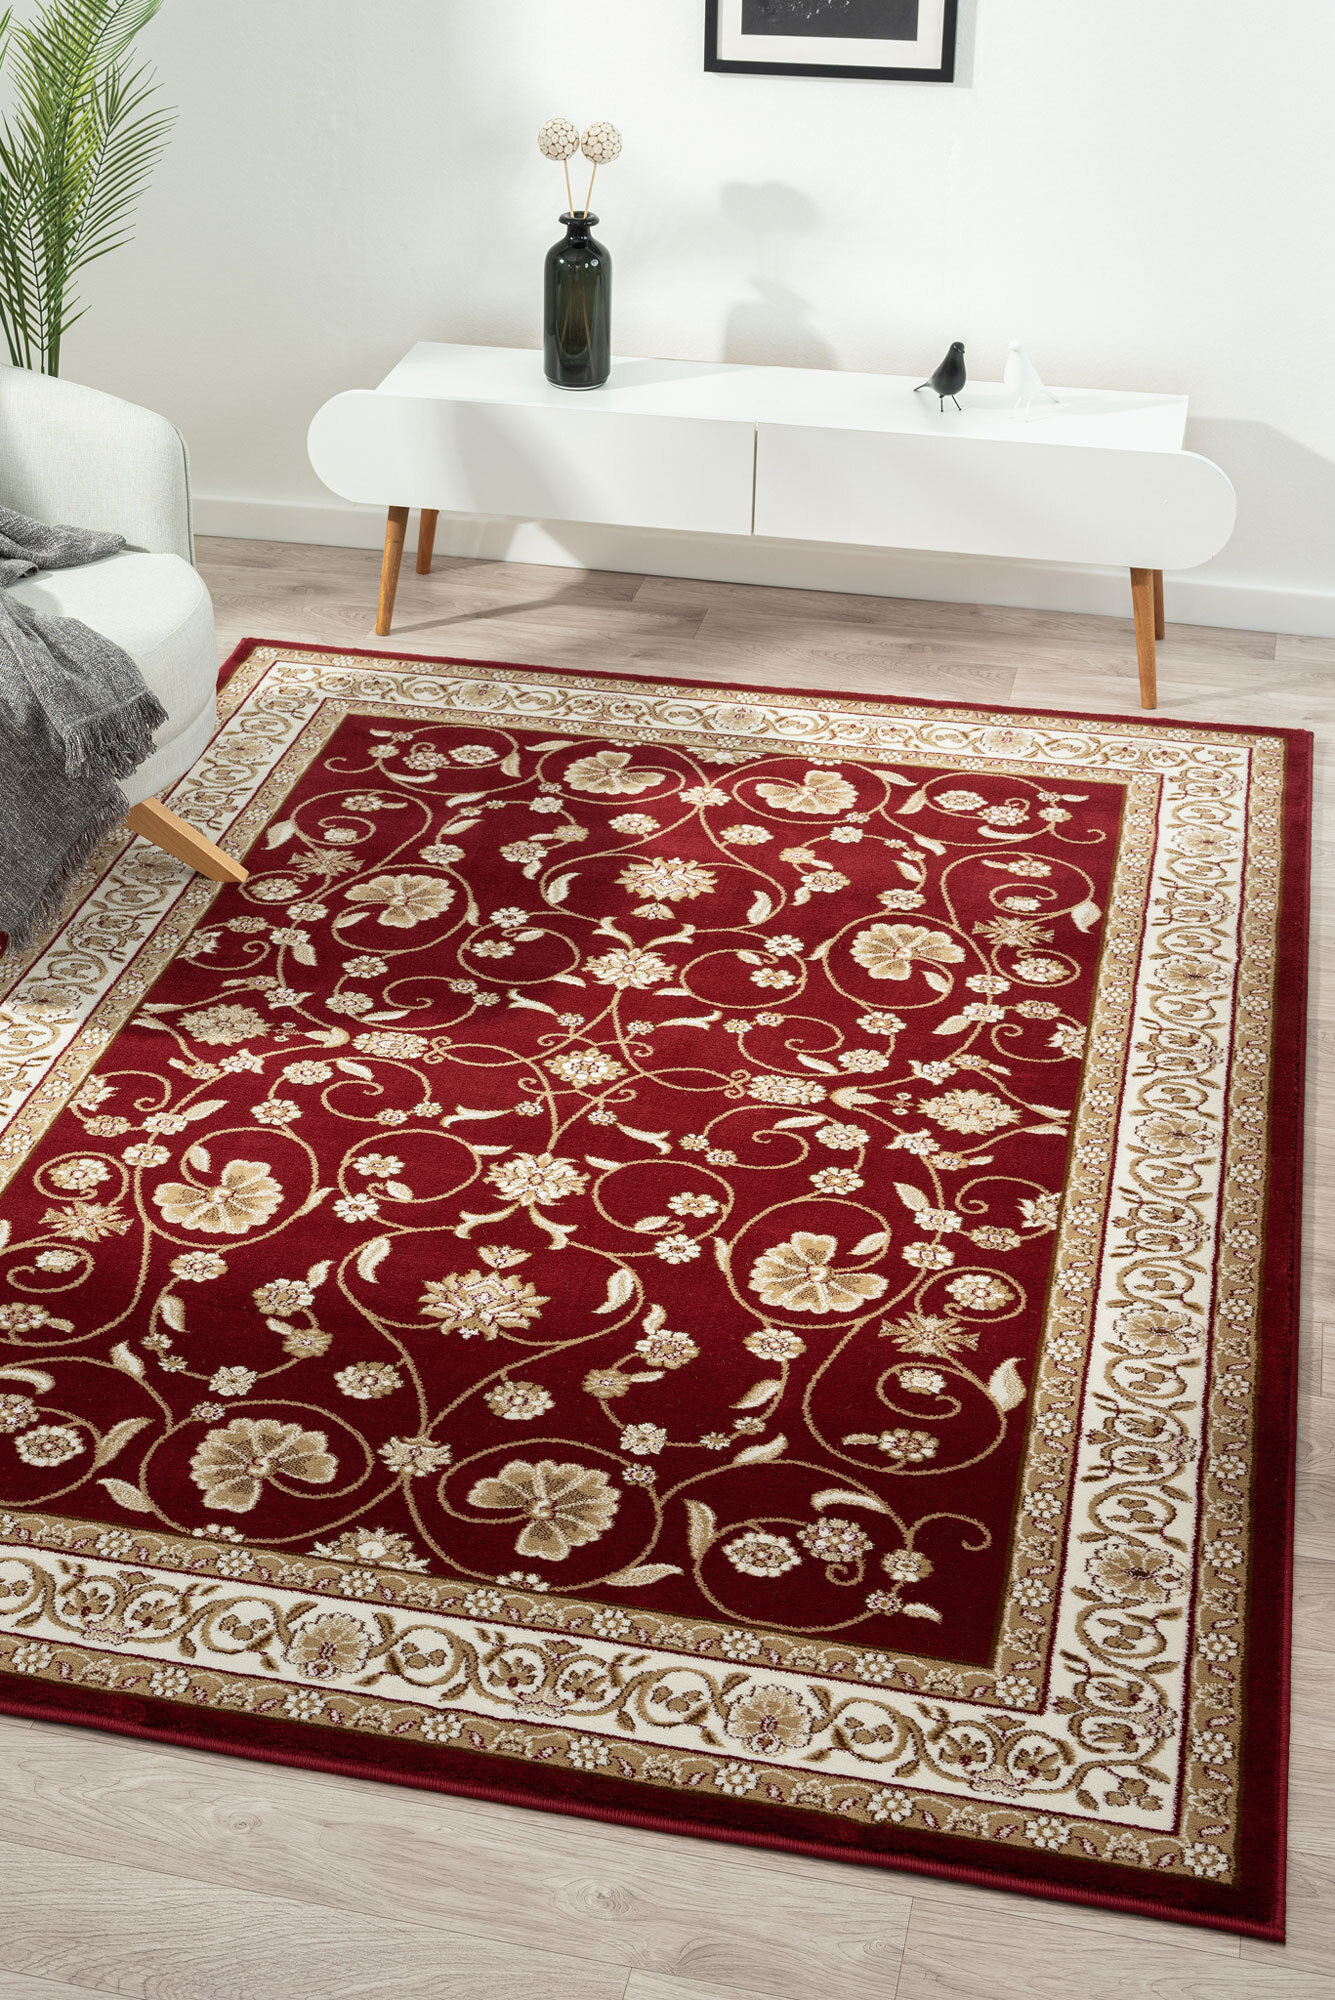 Erwin Traditional Floral Rug(Size 230 x 160cm)